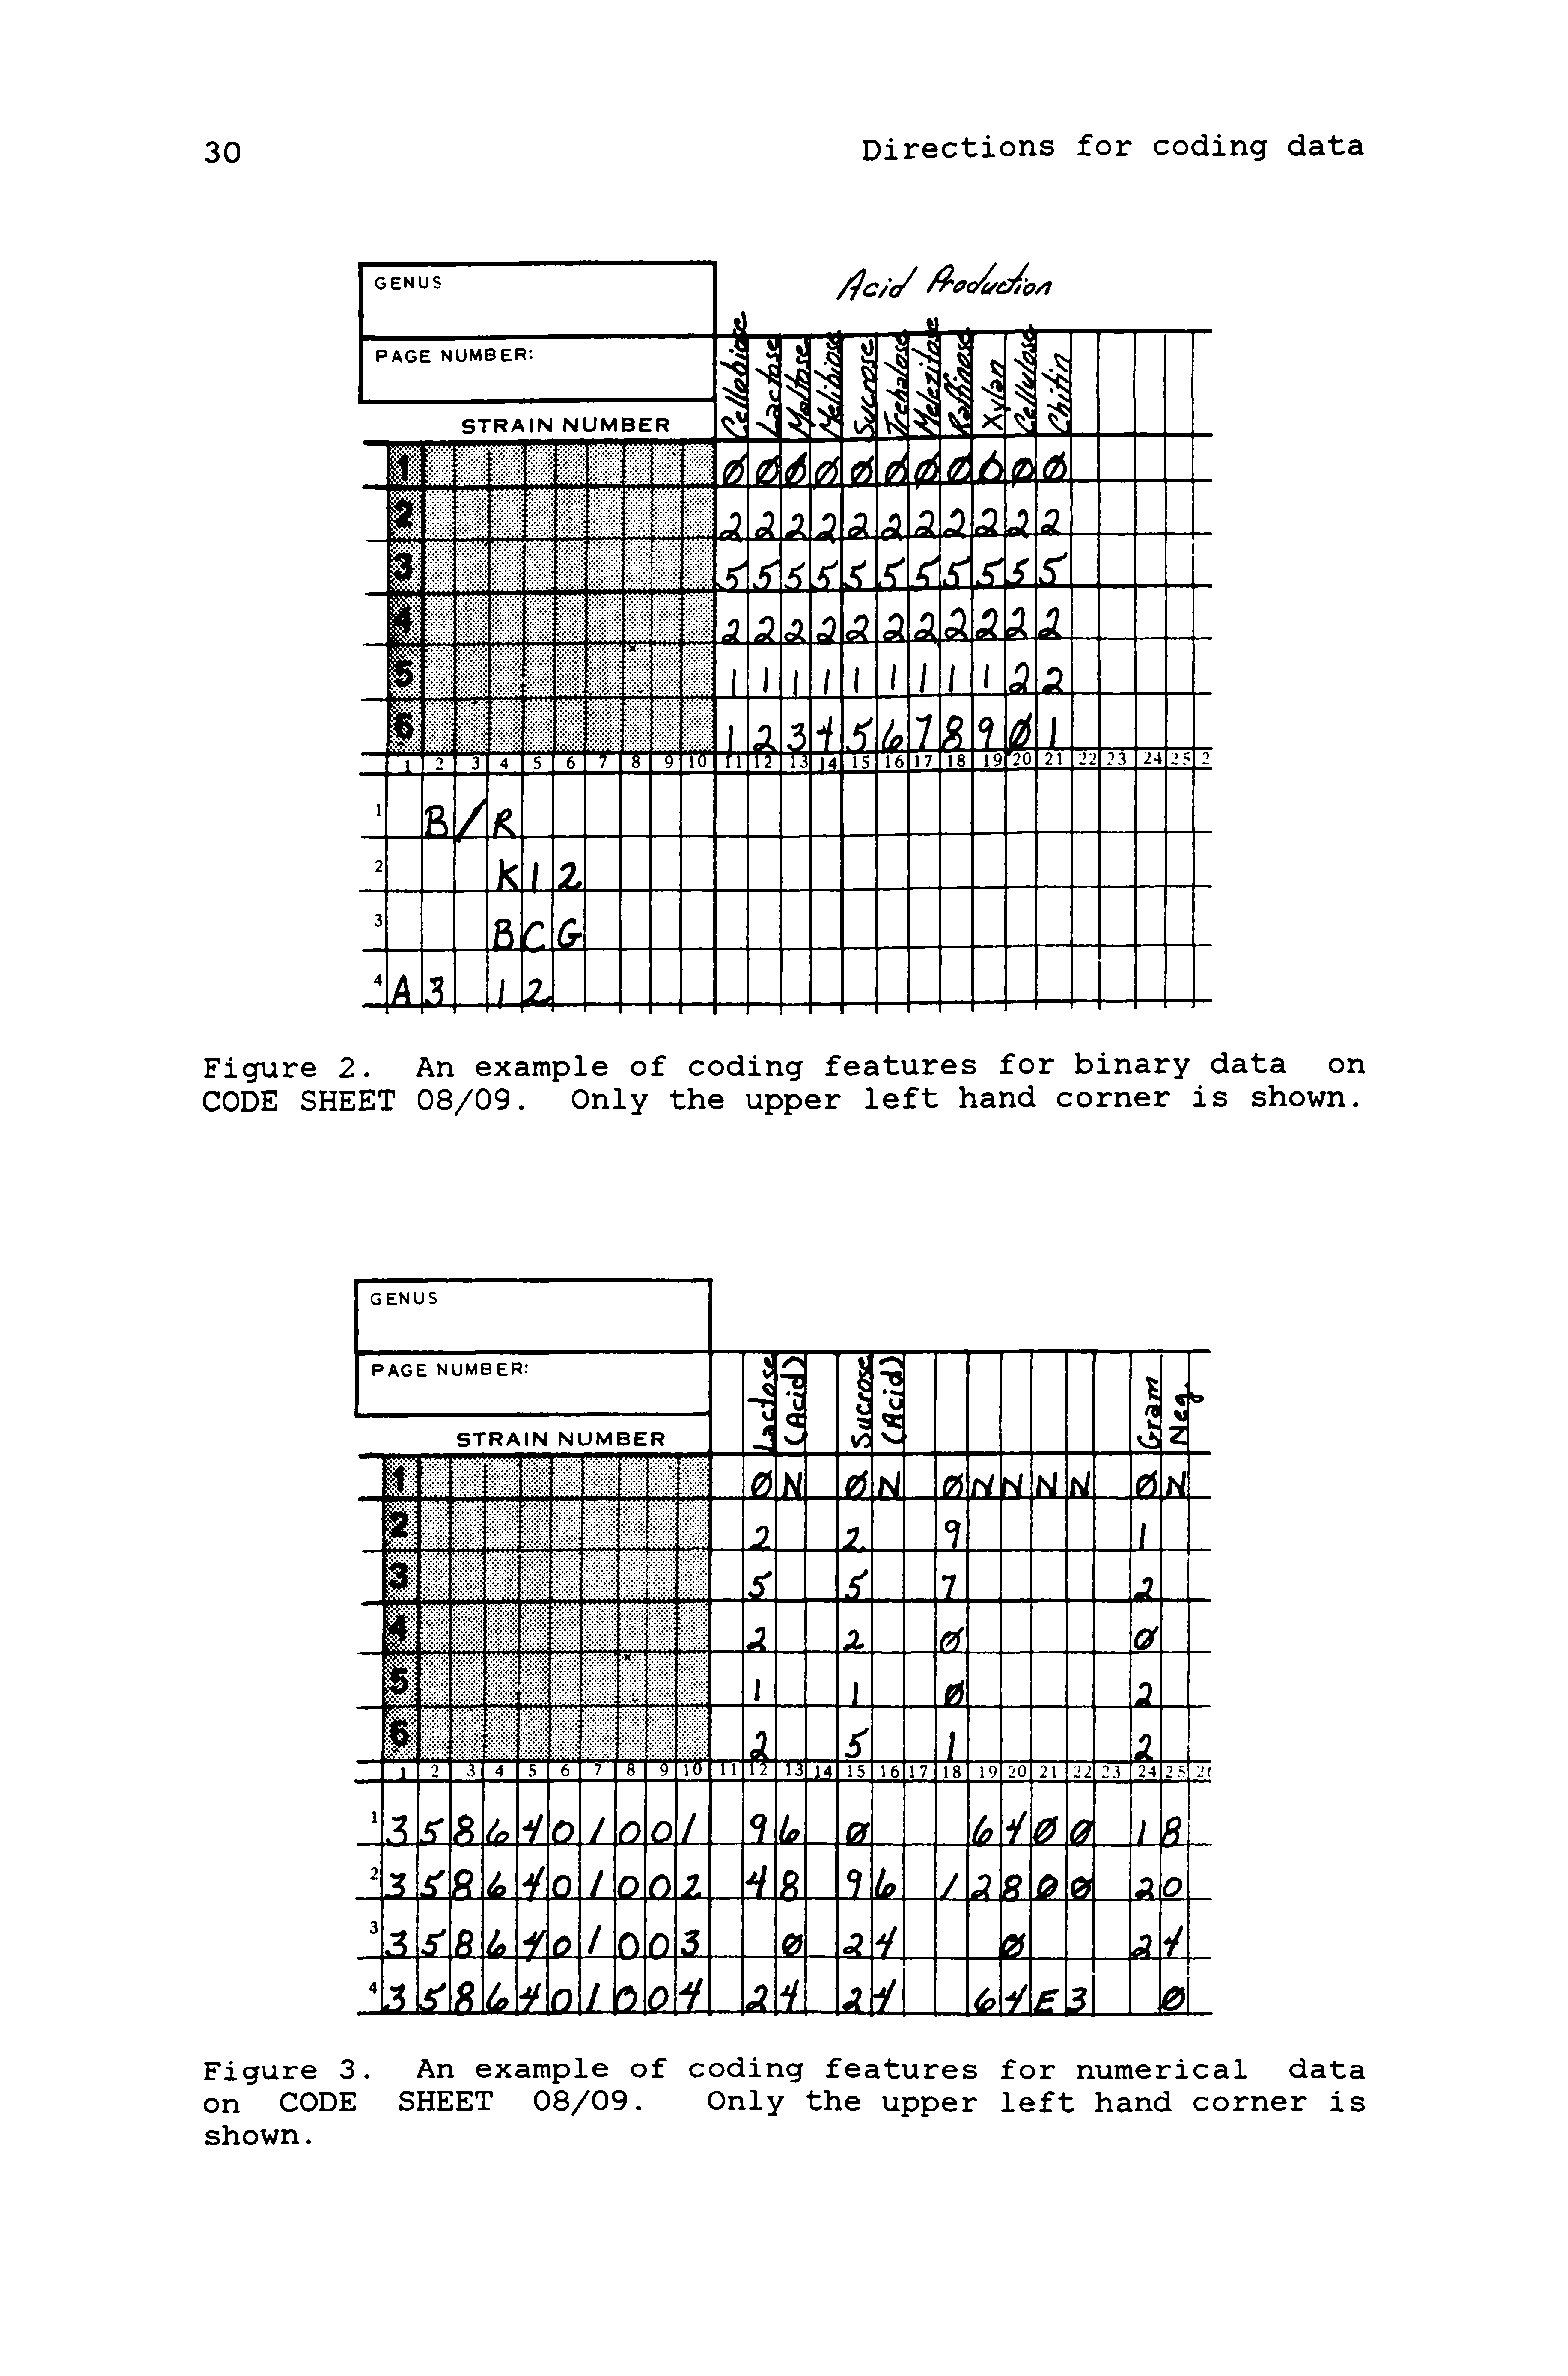 Figure 2. An example of coding features for binary data on CODE SHEET 08/09. Only the upper left hand corner is shown.